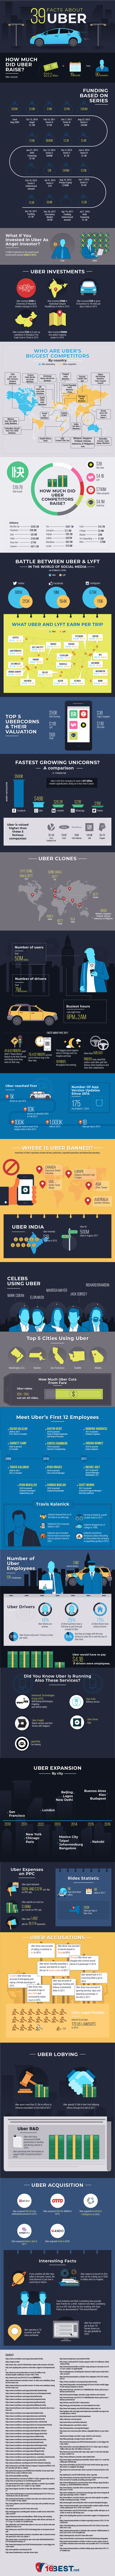 39 Facts About Uber (Infographic) 2018